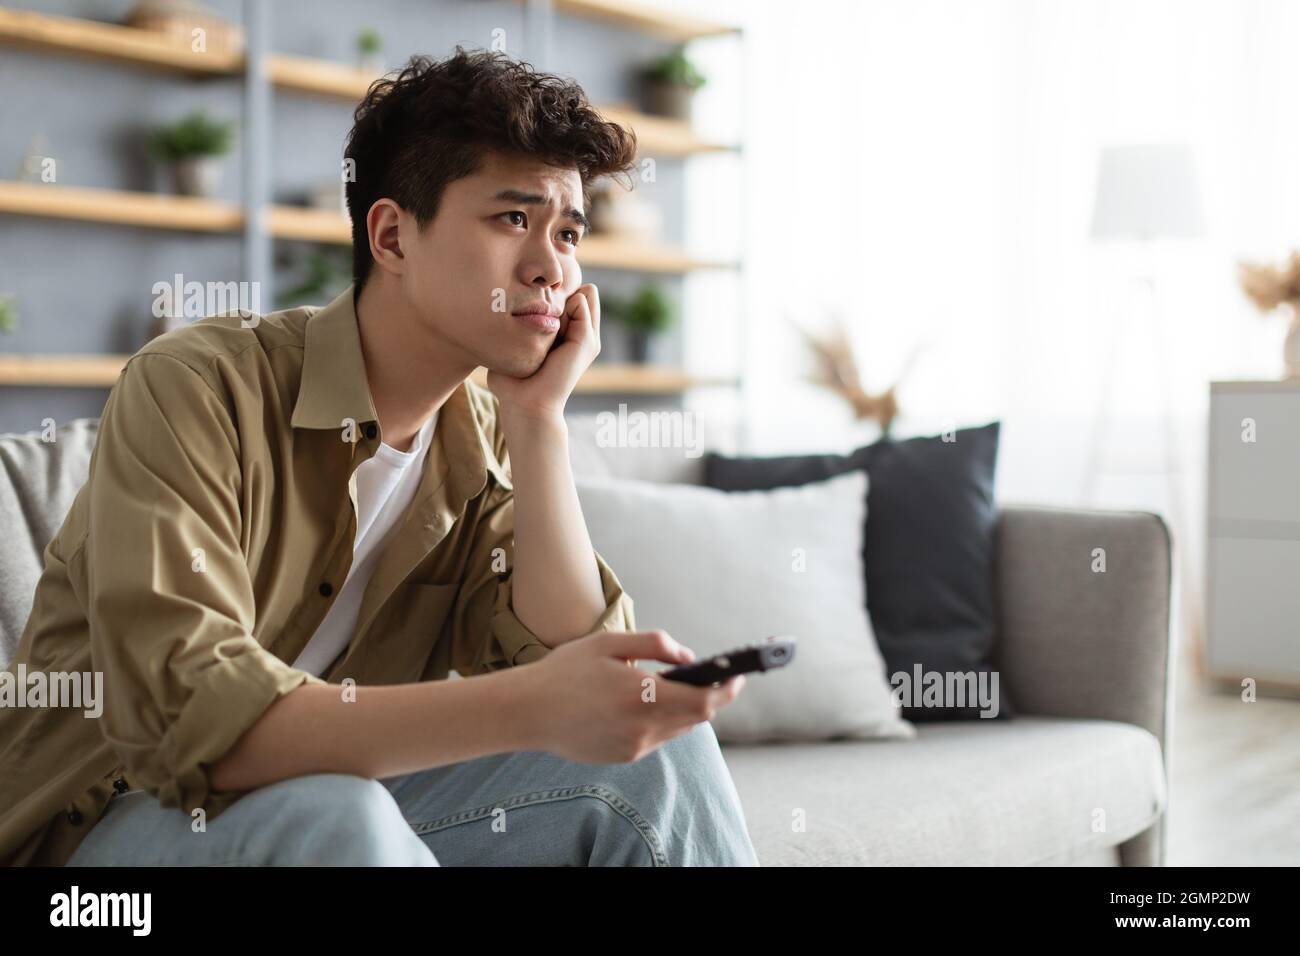 Bored asian man watching television sitting on couch Stock Photo